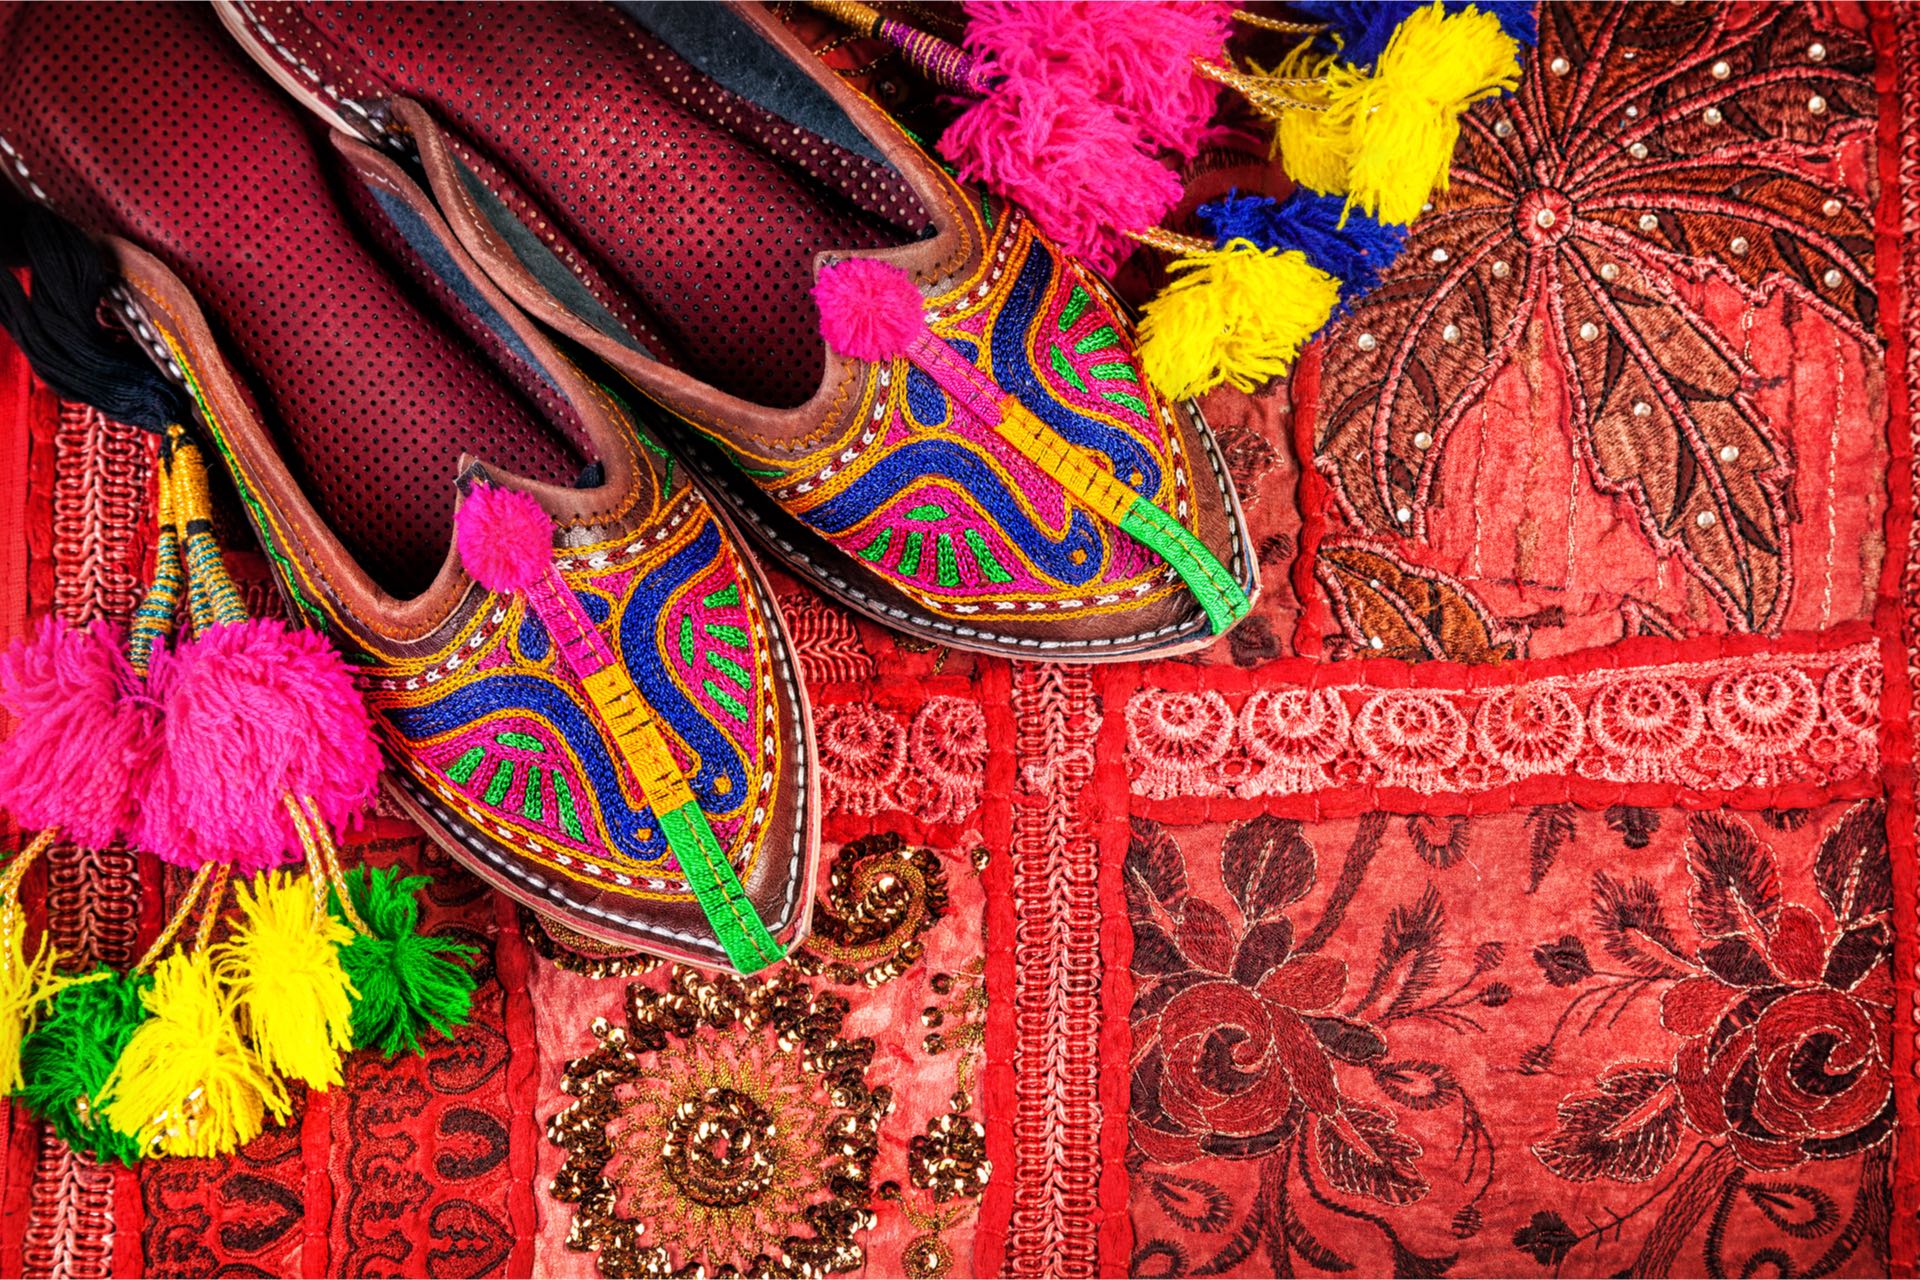 Colorful ethnic shoes and camel decorations on red Rajasthan cushion cover on flea market in India